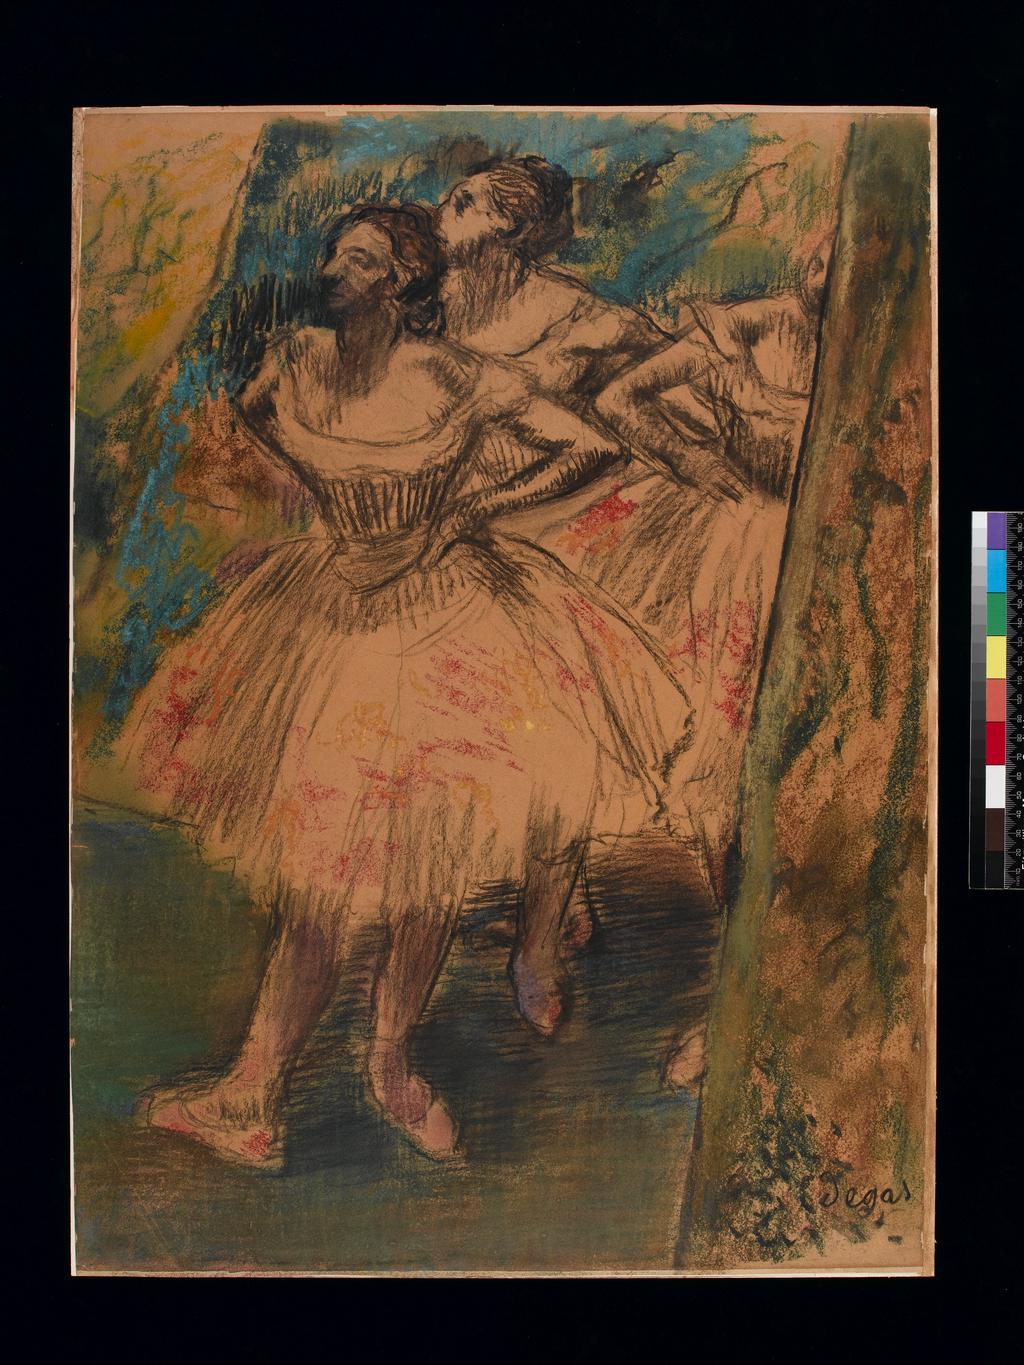 An image of Dancers in the Wing. Degas, Edgar (French, 1834-1917). Black chalk and pastel, height 600mm, width 443mm, ca 1900.